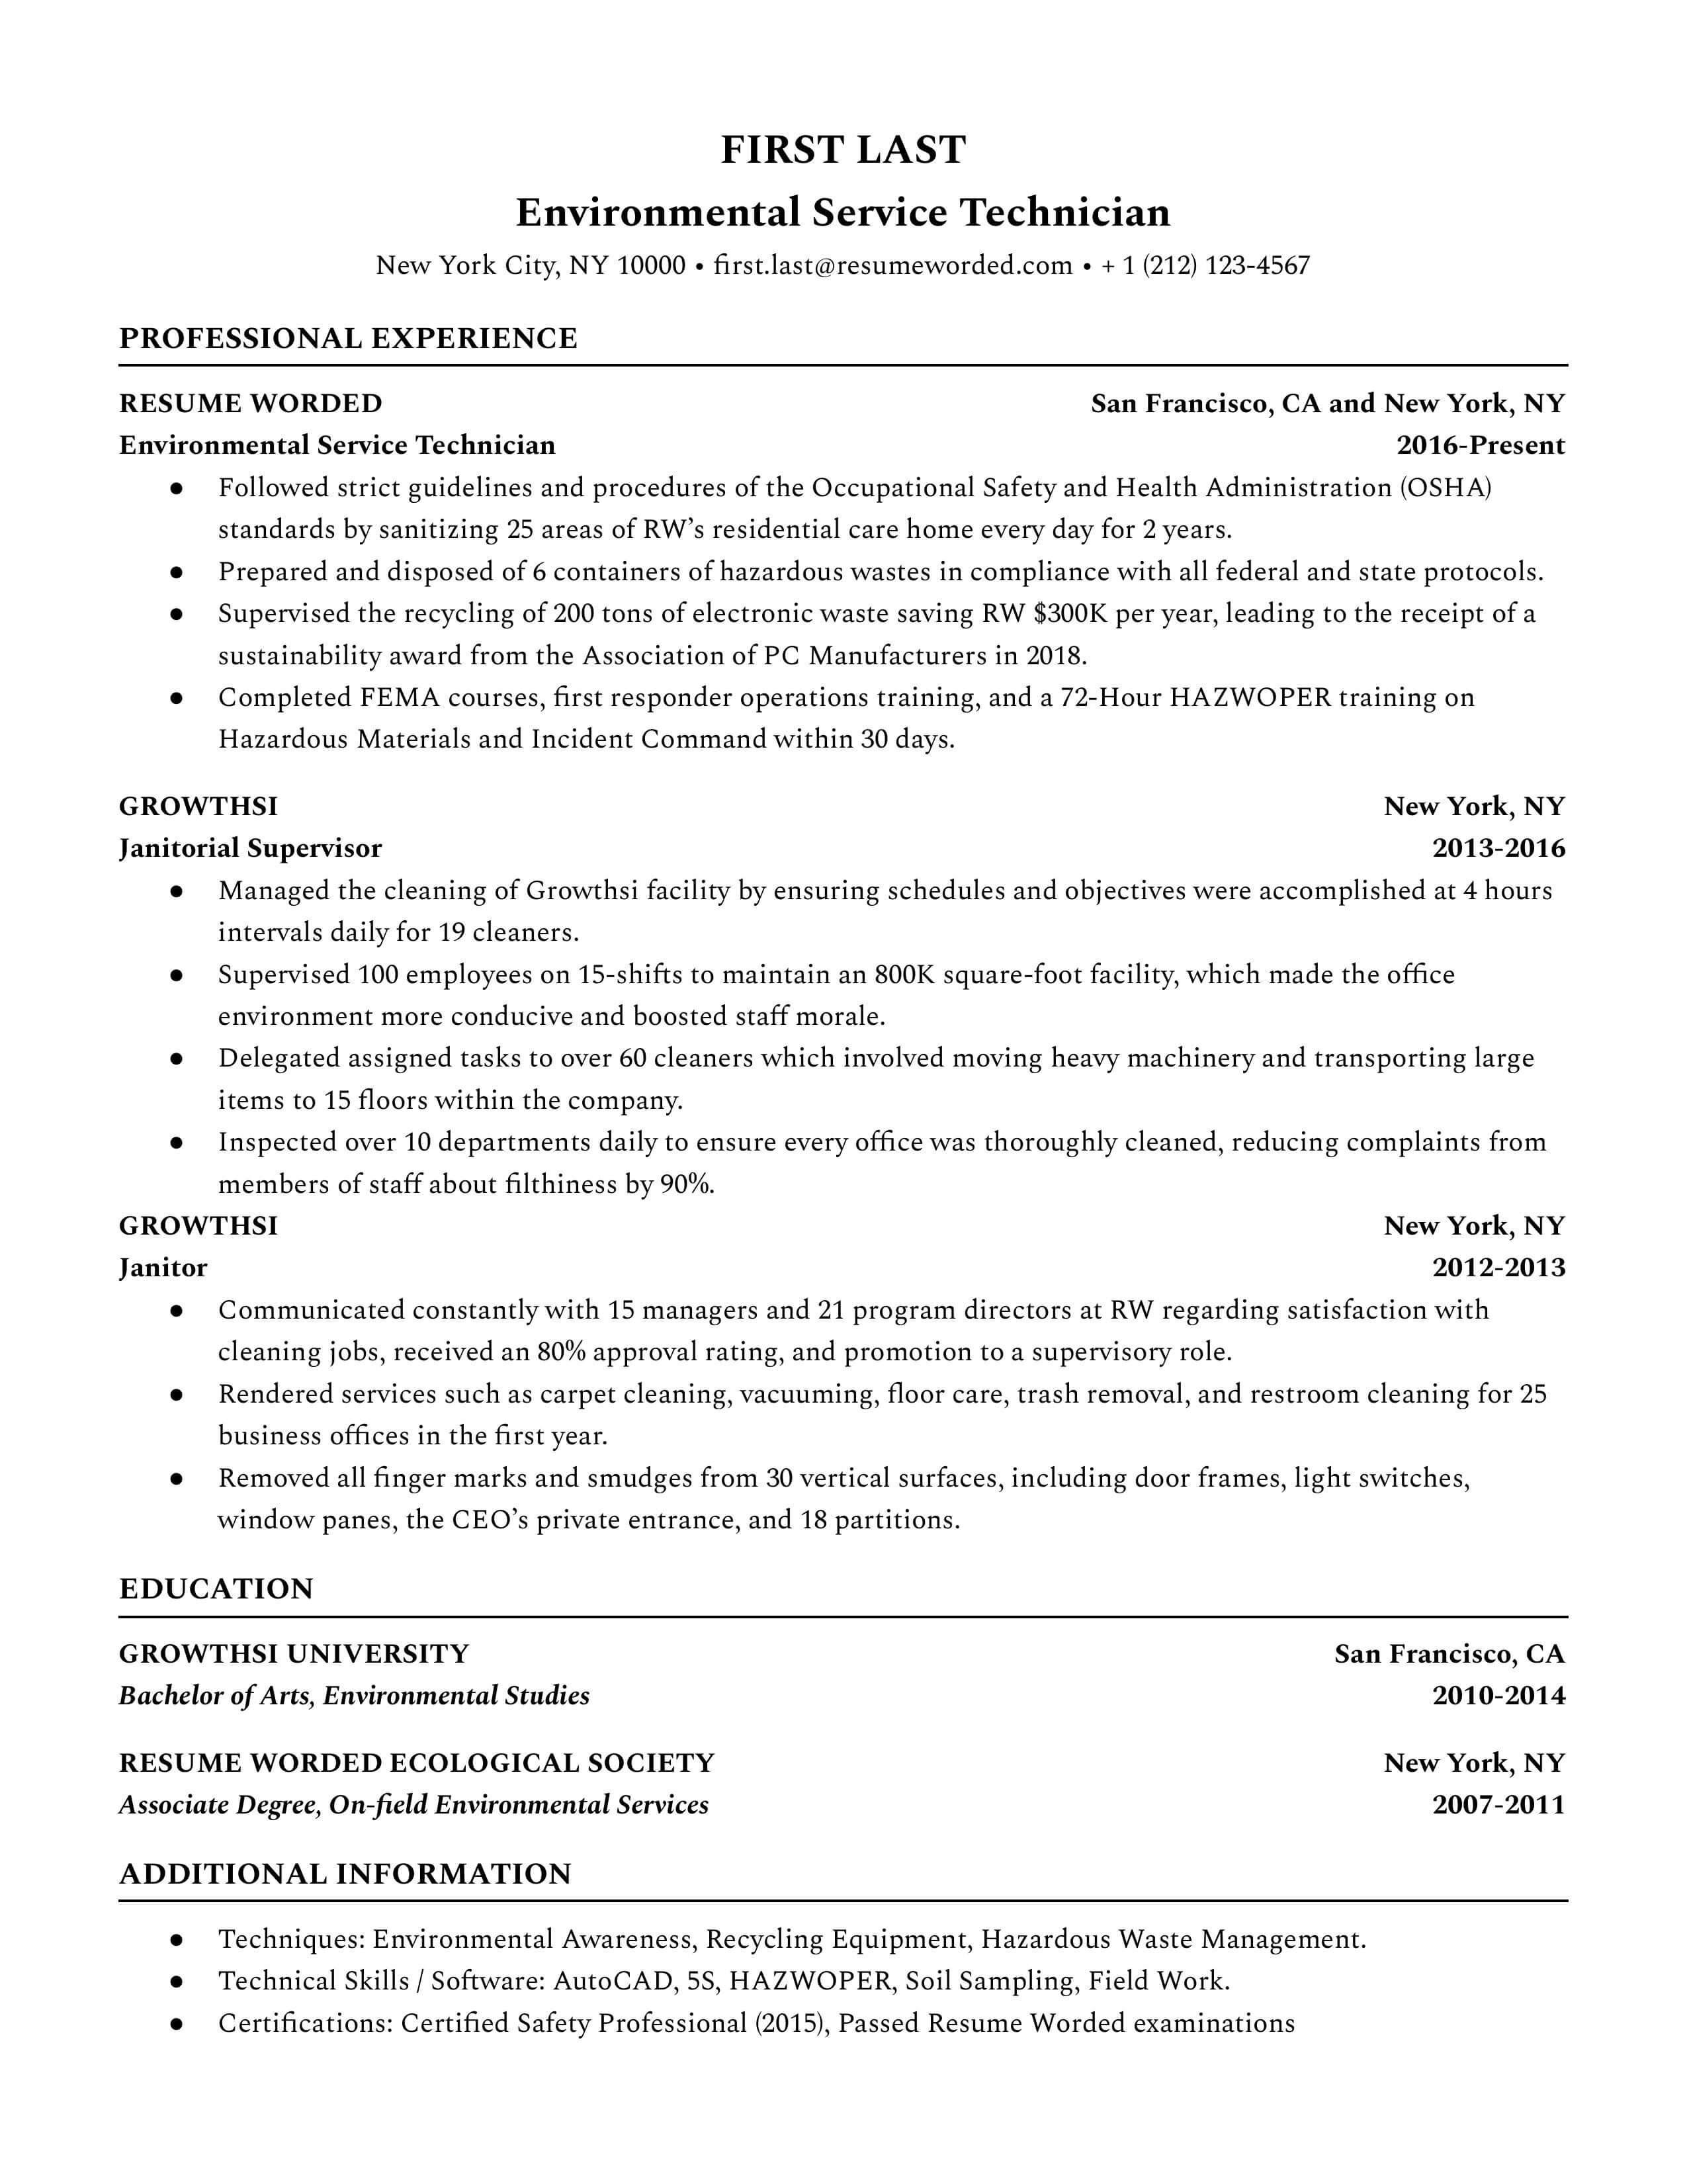 An Environmenal Service Technician resume sample showing career growth and acquired professional experience.